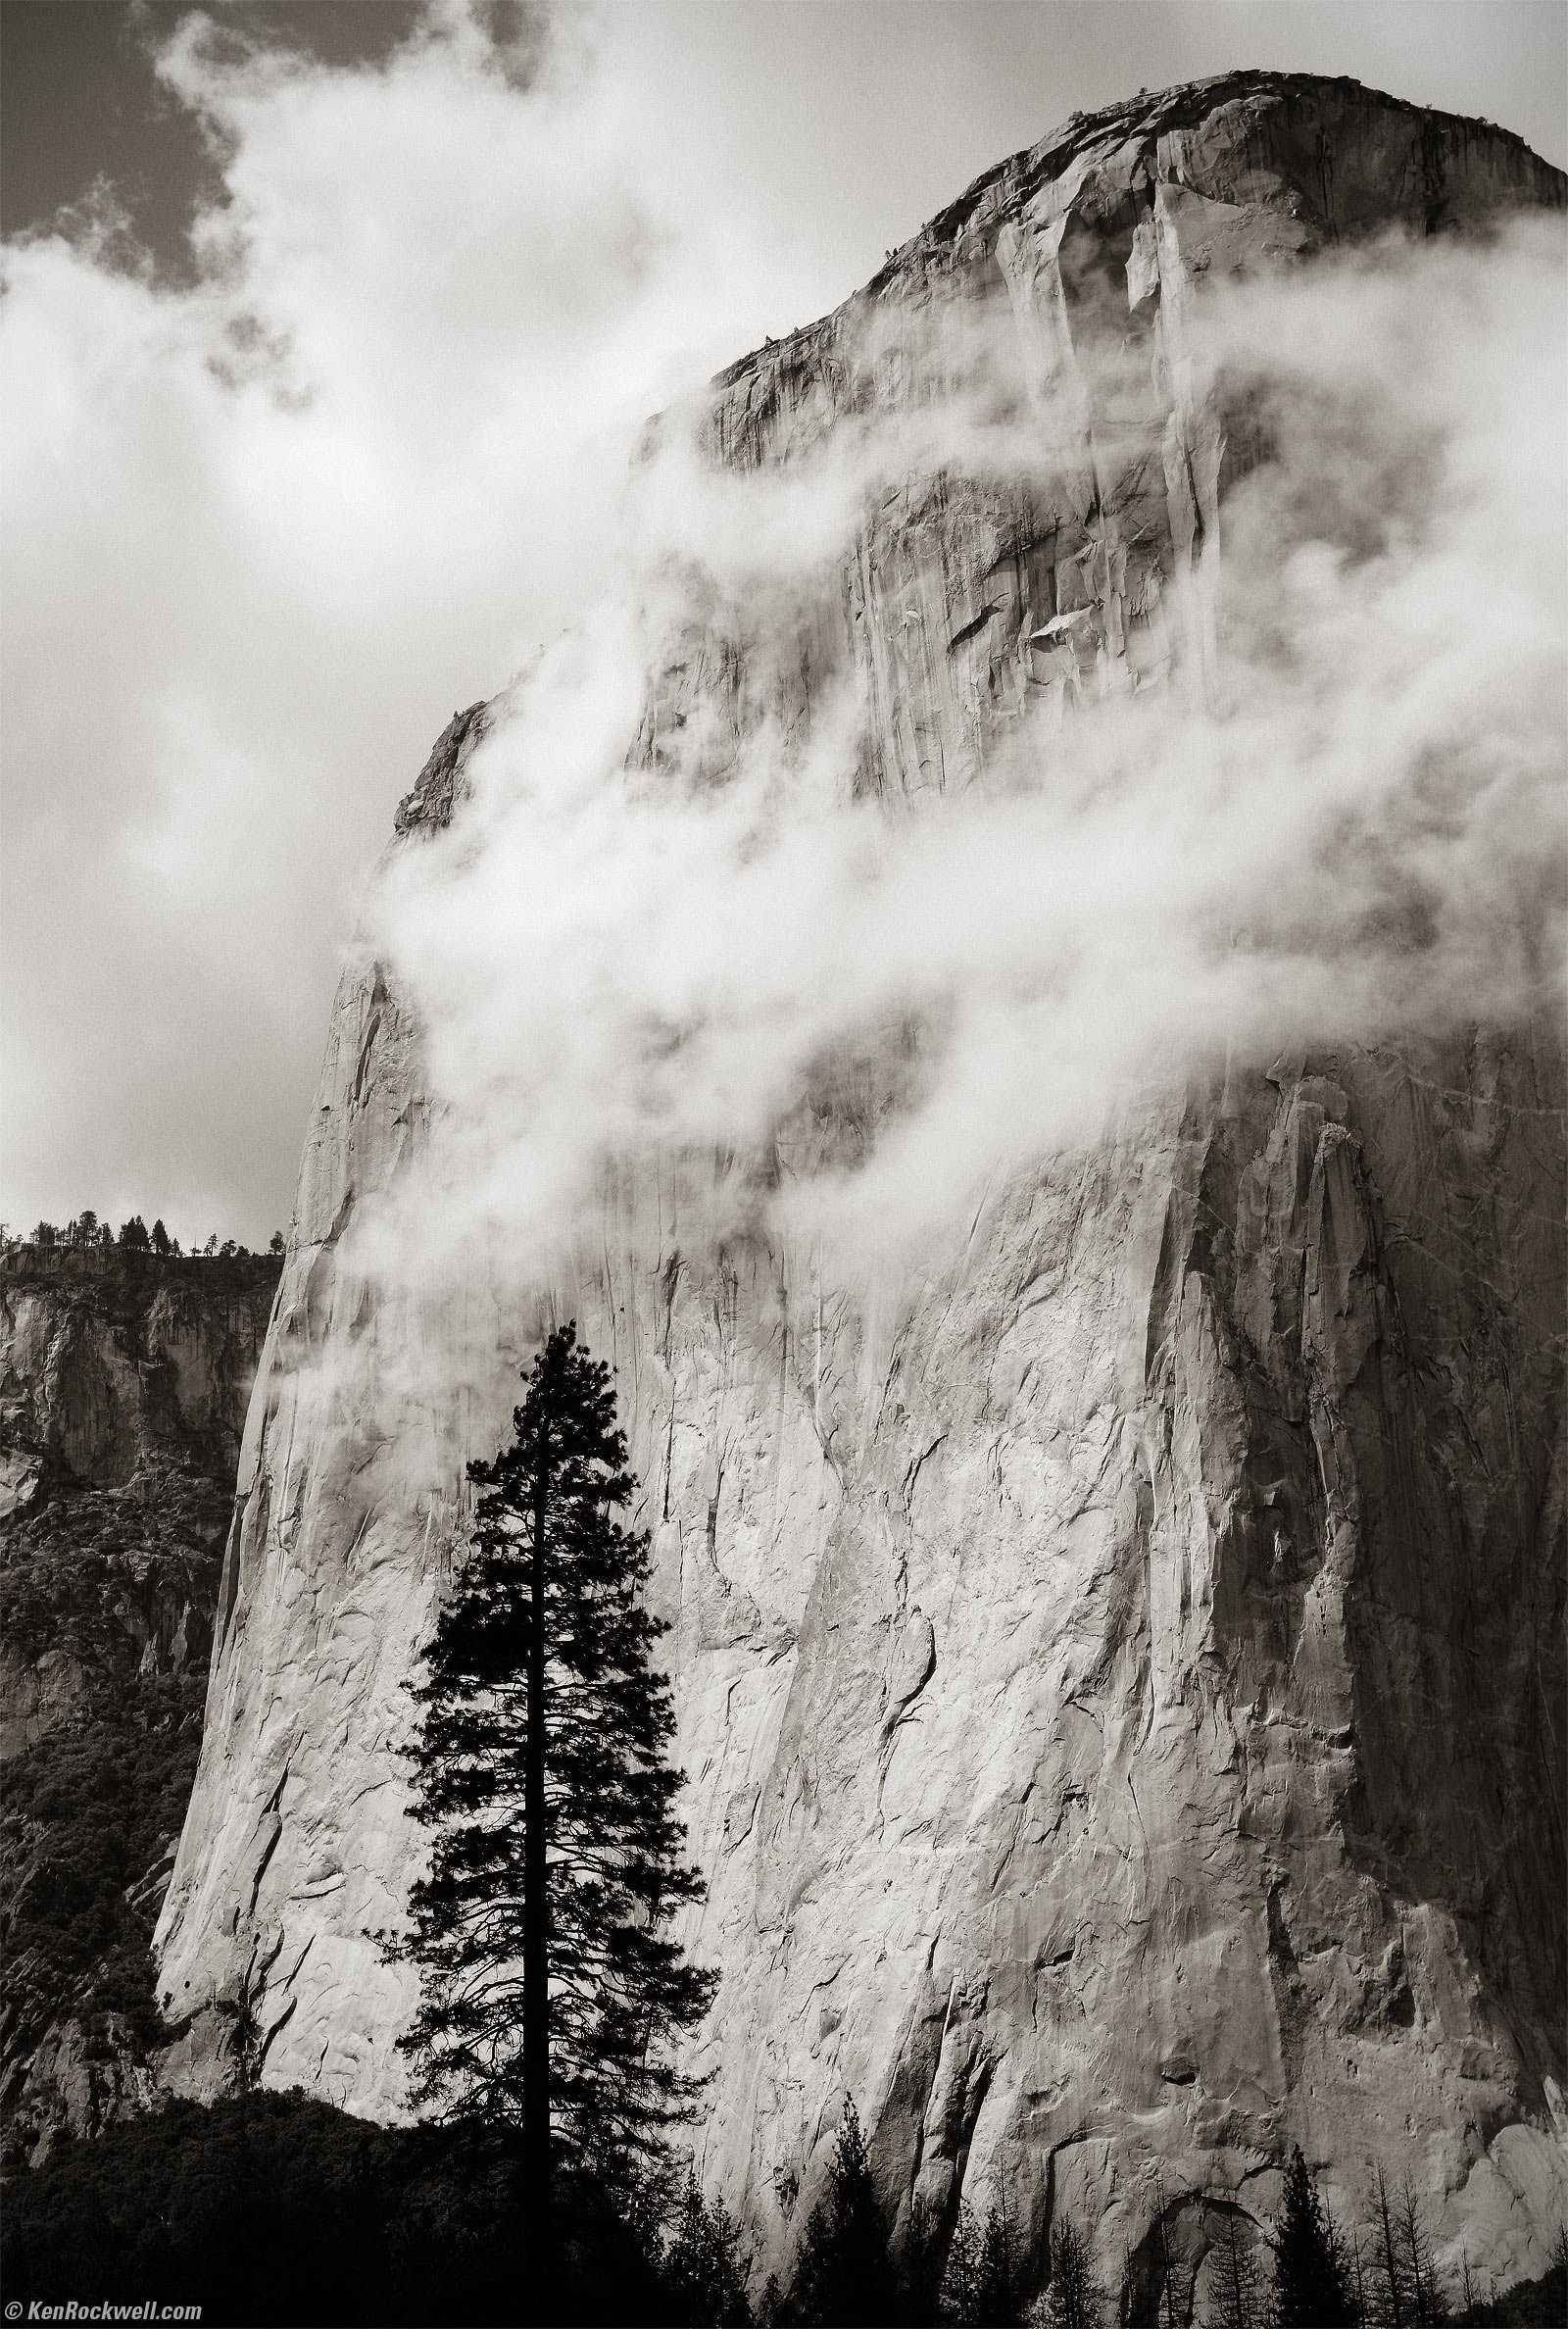 El Capitan with tree in clouds in Black and White